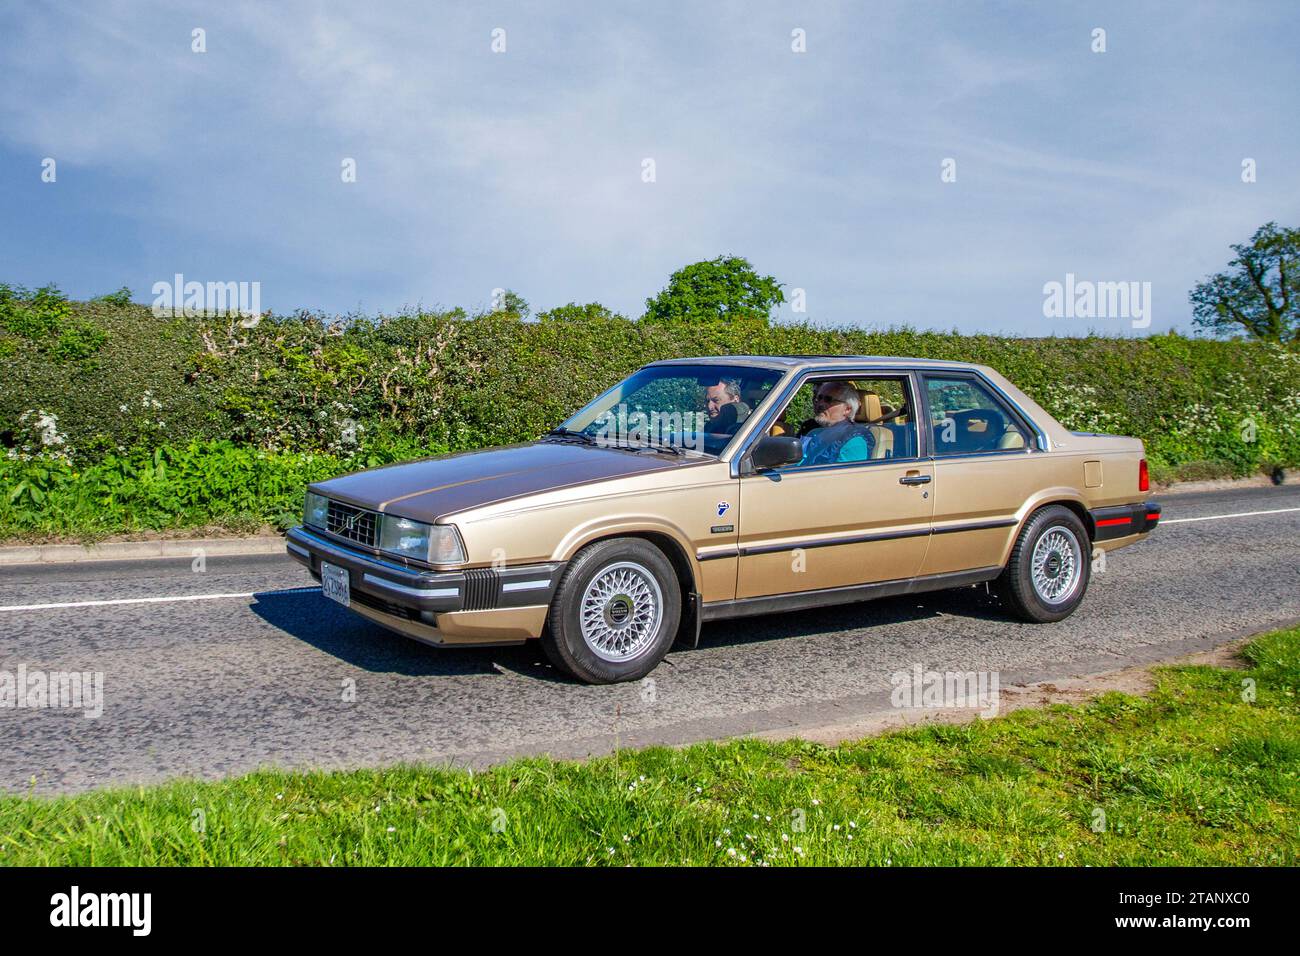 1990 90s nineties California Volvo 780 Bertone 2.3-litre  Coupe. Champagne four-cylinder, turbocharged, 4-speed auto, rear-wheel drive; Vintage, restored classic motors, automobile collectors motoring enthusiasts, historic veteran cars travelling in Cheshire, UK Stock Photo